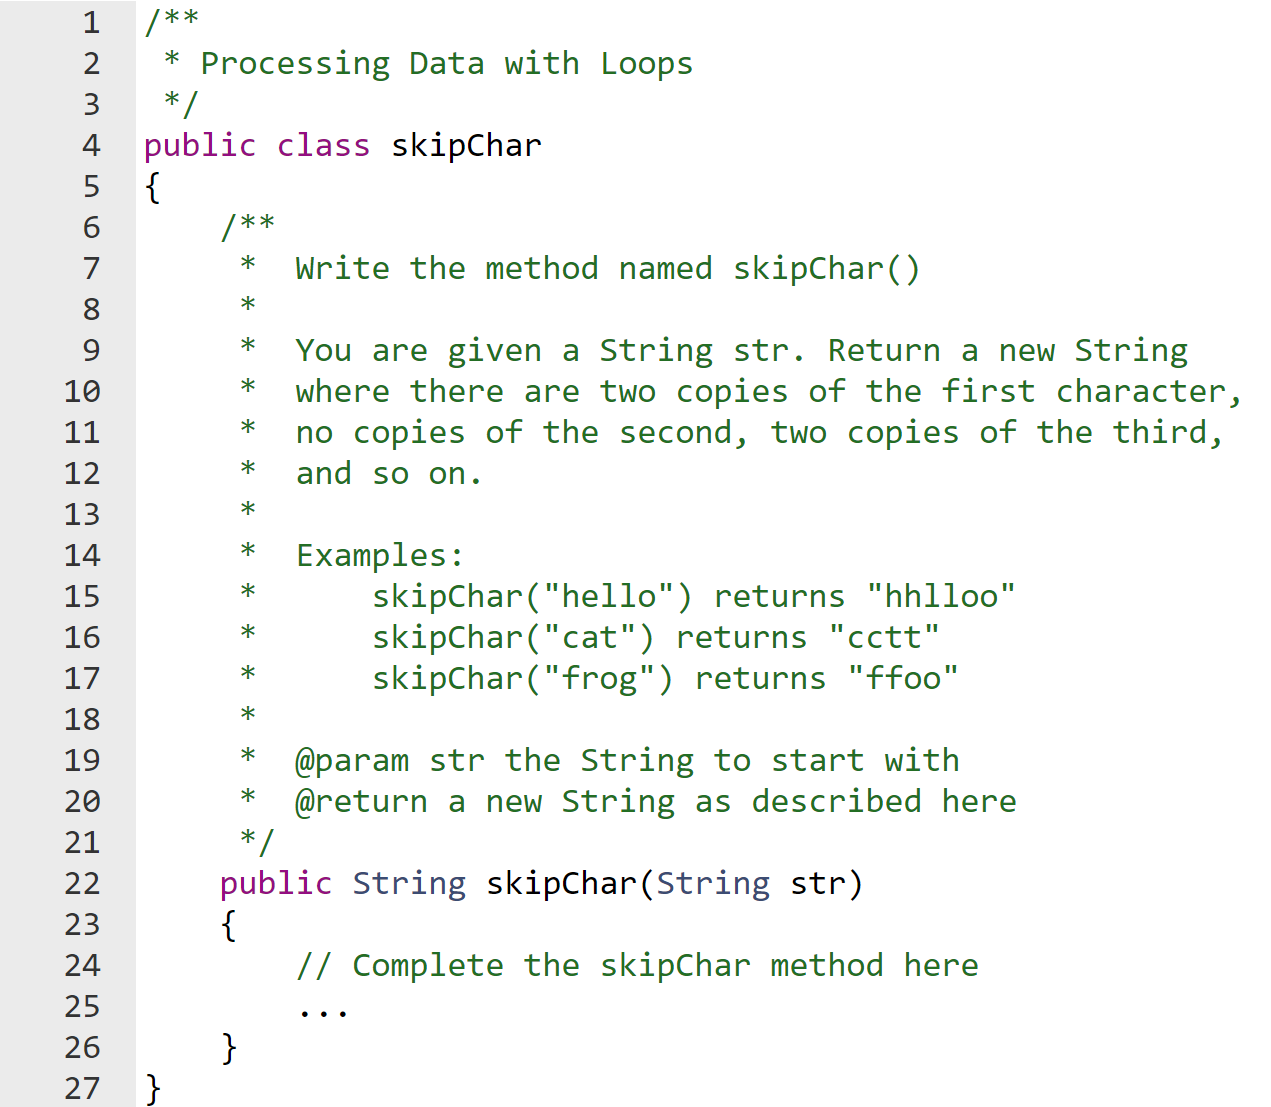 /**
* Processing Data with Loops
*/
public class skipChar
{
/**
Write the method named skipChar()
You are given a String str. Return a new String
where there are two copies of the first character,
no copies of the second, two copies of the third,
and so on.
*
Examples:
skipChar("hello") returns "hhlloo"
skipChar("cat") returns "cctt"
skipChar("frog") returns "ffoo"
*
*
@param str the String to start with
@return a new String as described here
*/
*
public String skipChar(String str)
{
// Complete the skipChar method here
}
}
